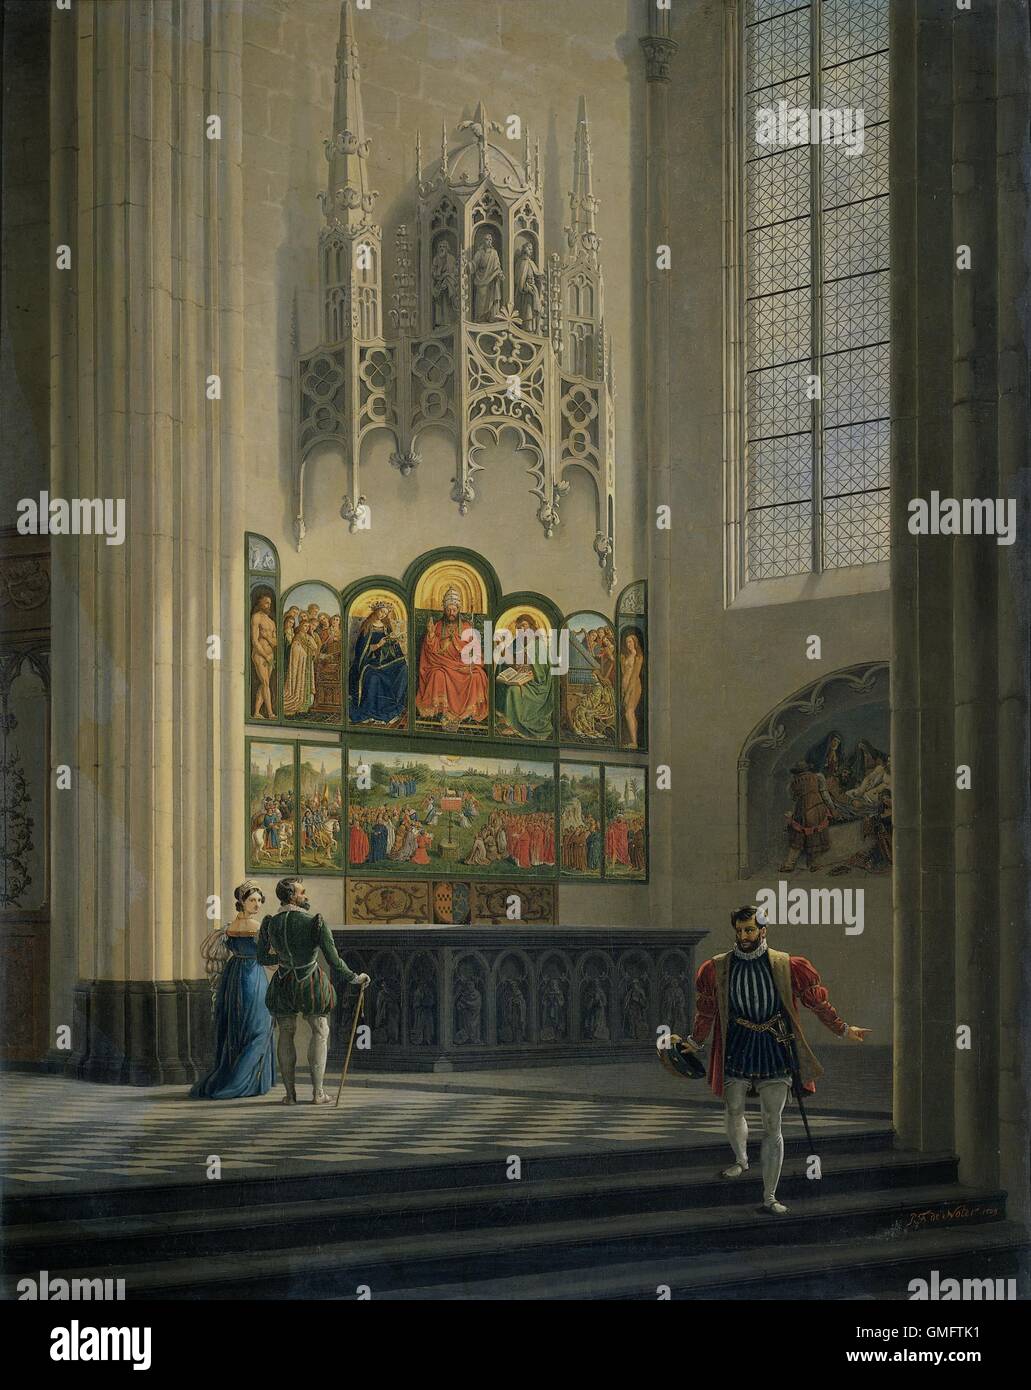 Ghent Altarpiece by the van Eyck Brothers in St Bavo Cathedral, by Pierre Francois De Noter, 1829. Belgian painting, oil on canvas. The Northern Renaissance masterpiece with people in 16th century costume. (BSLOC 2016 1 116) Stock Photo